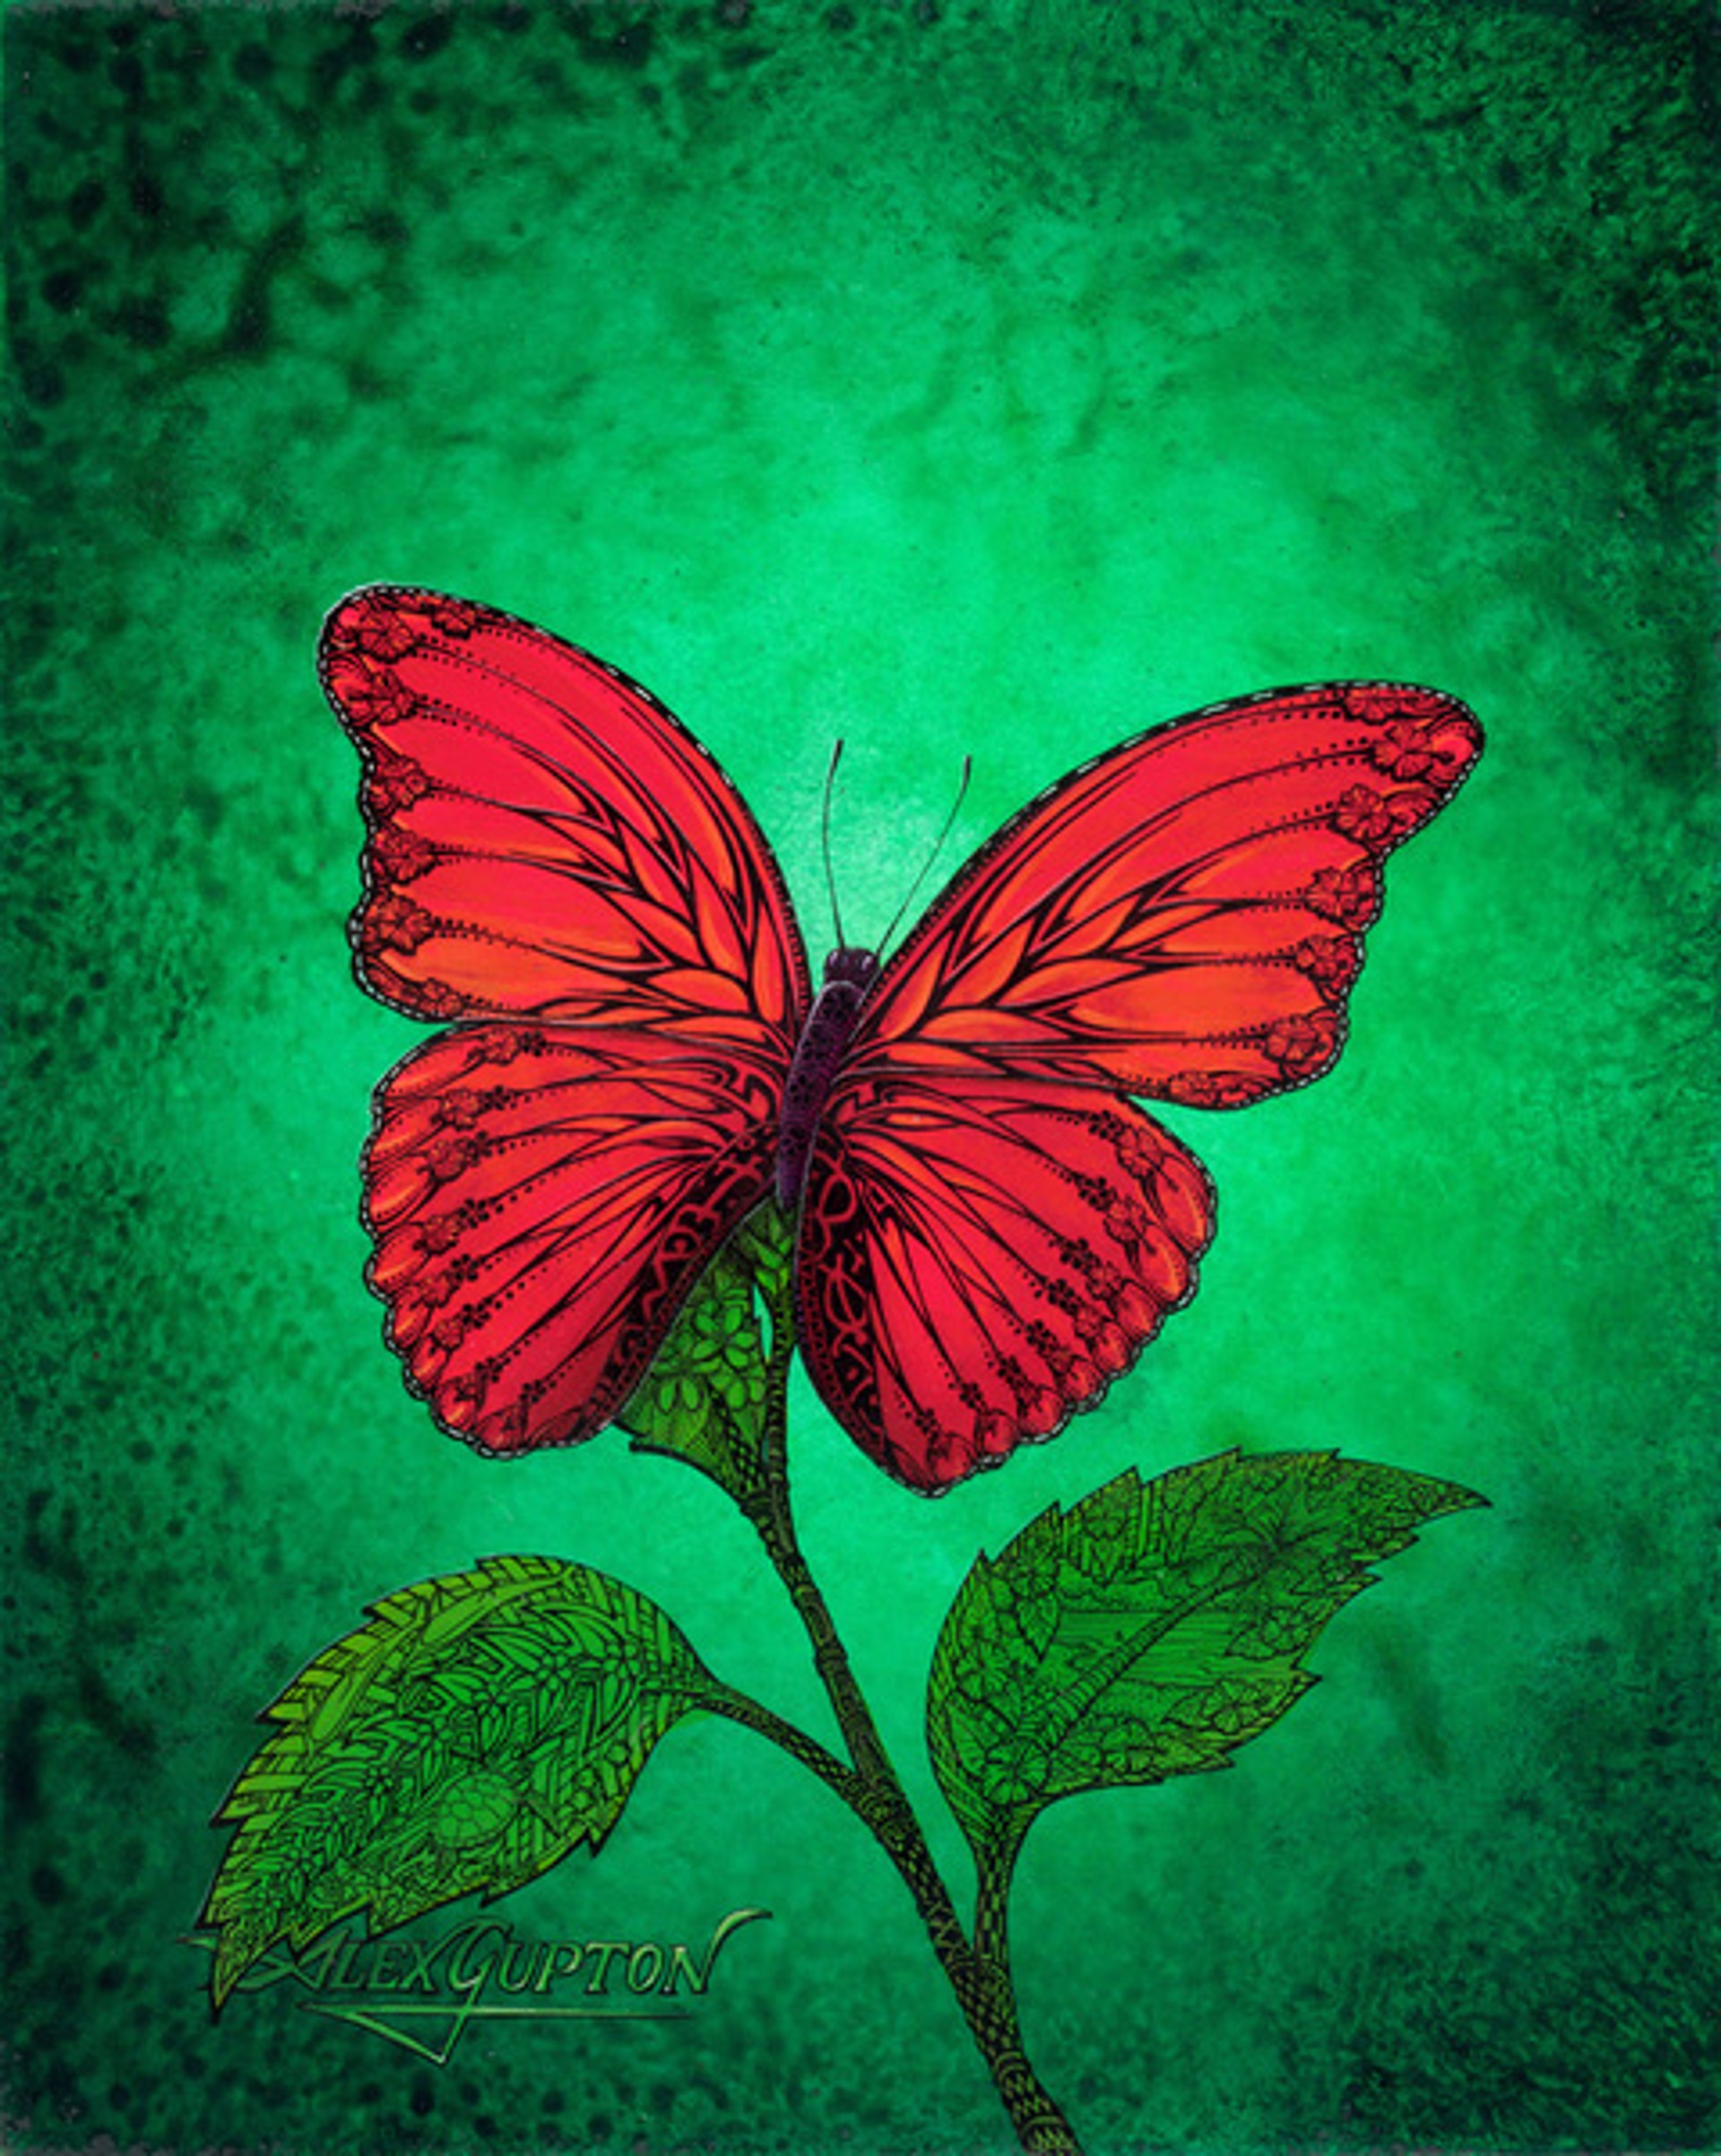 Flowering Butterfly by Alex Gupton